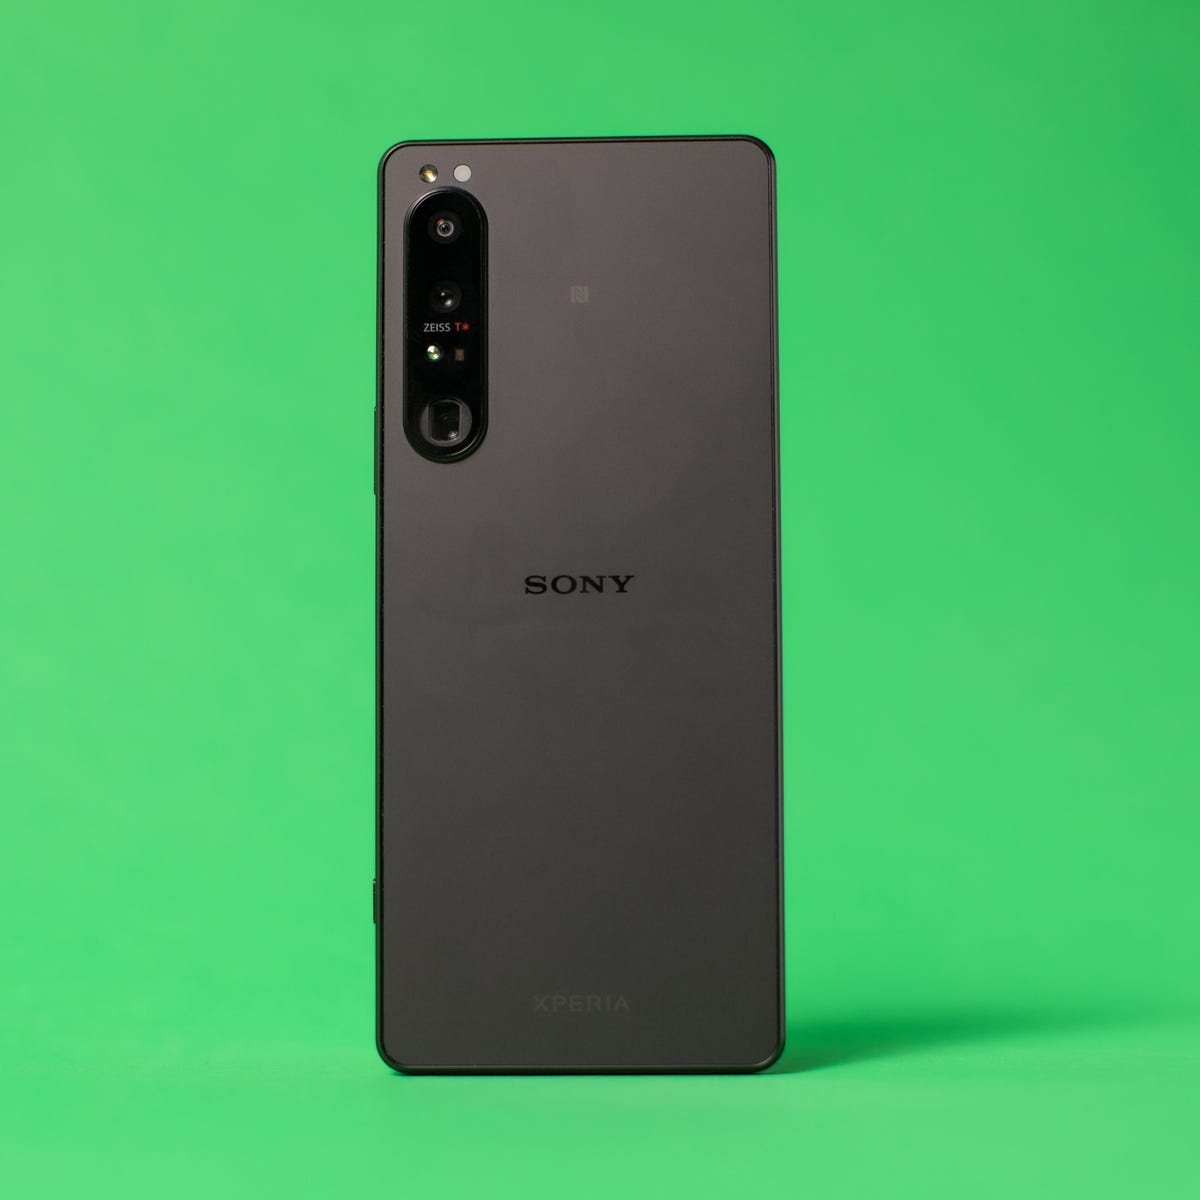 Sony Xperia 1 V review: Too much money, not enough phone